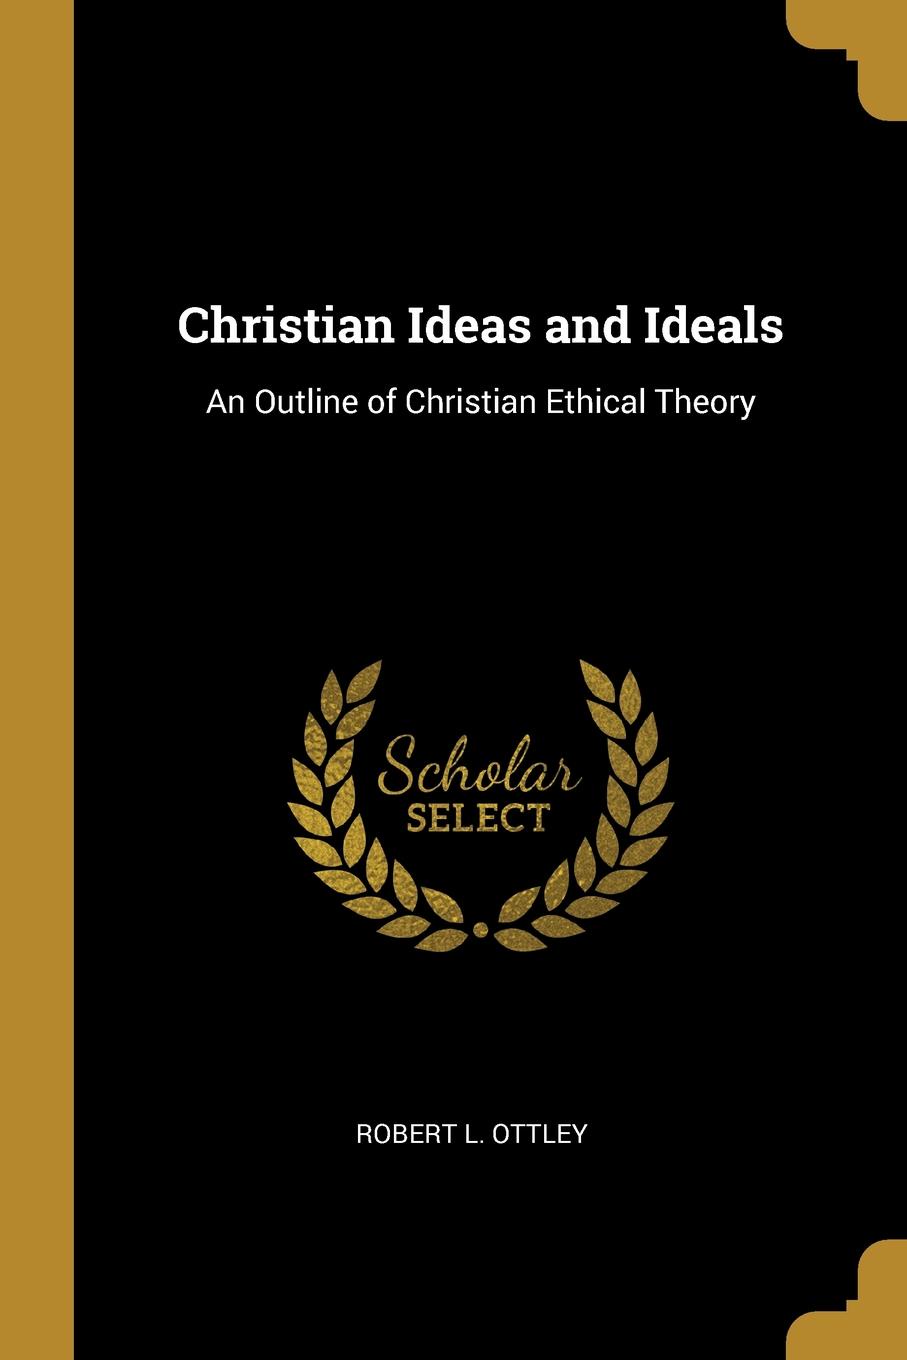 Christian Ideas and Ideals. An Outline of Christian Ethical Theory